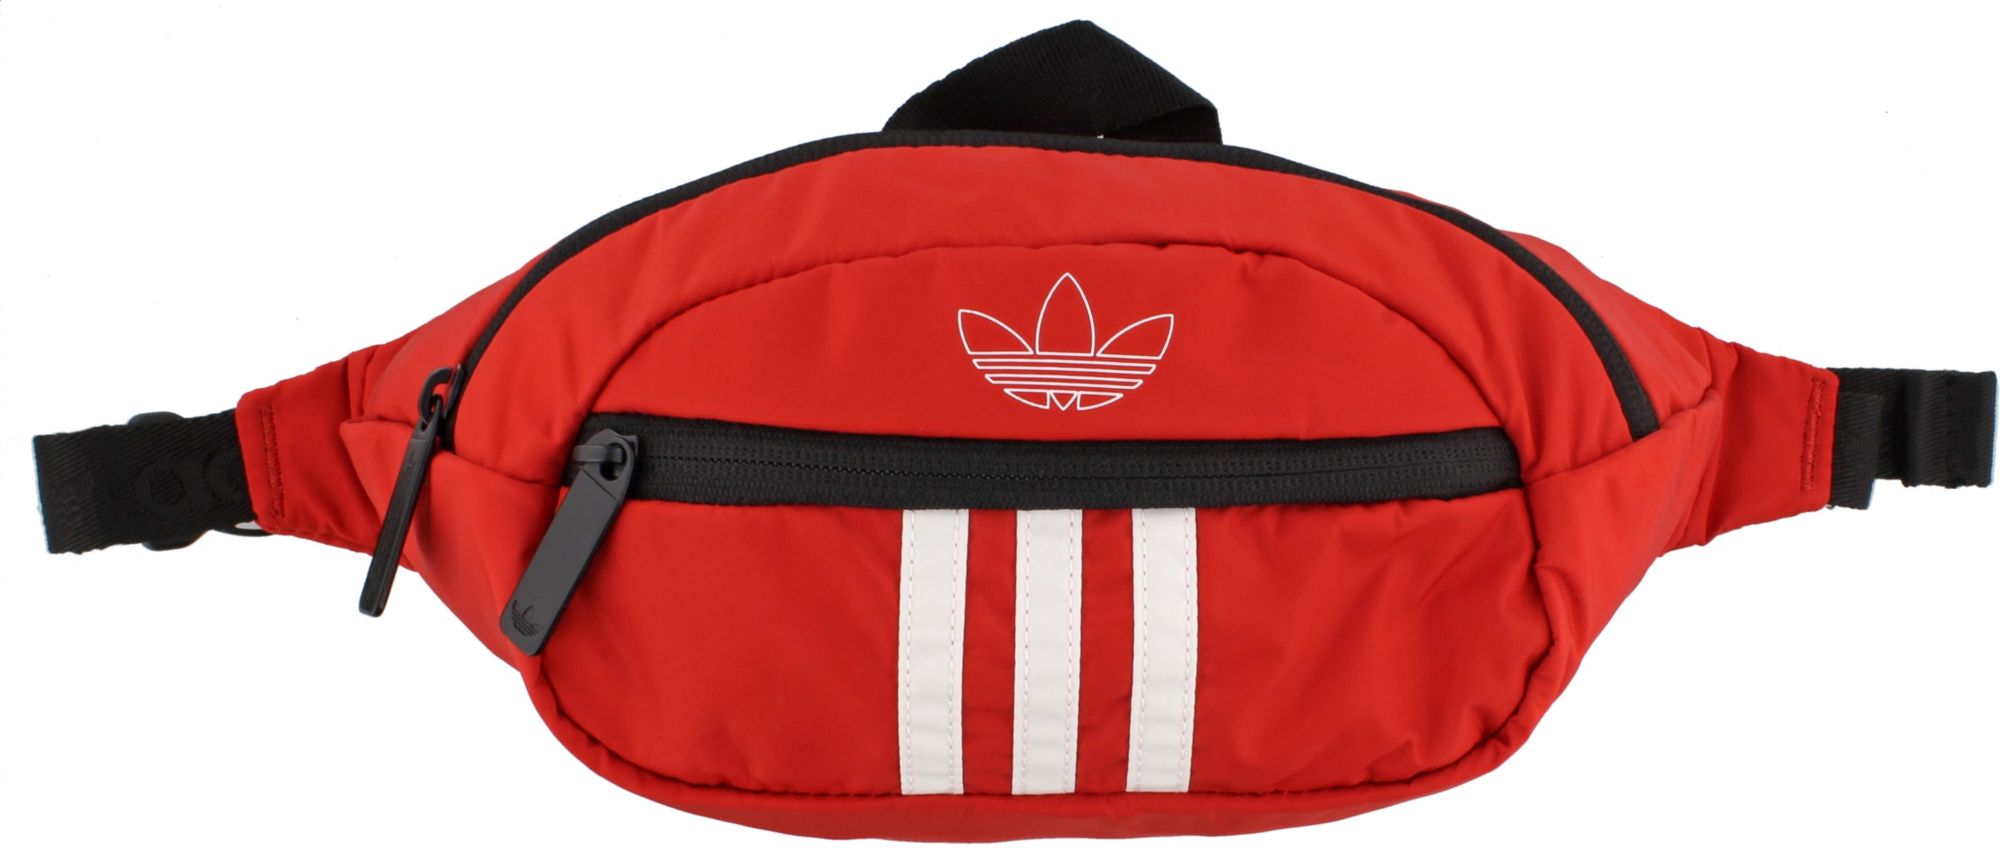 adidas fanny pack in store